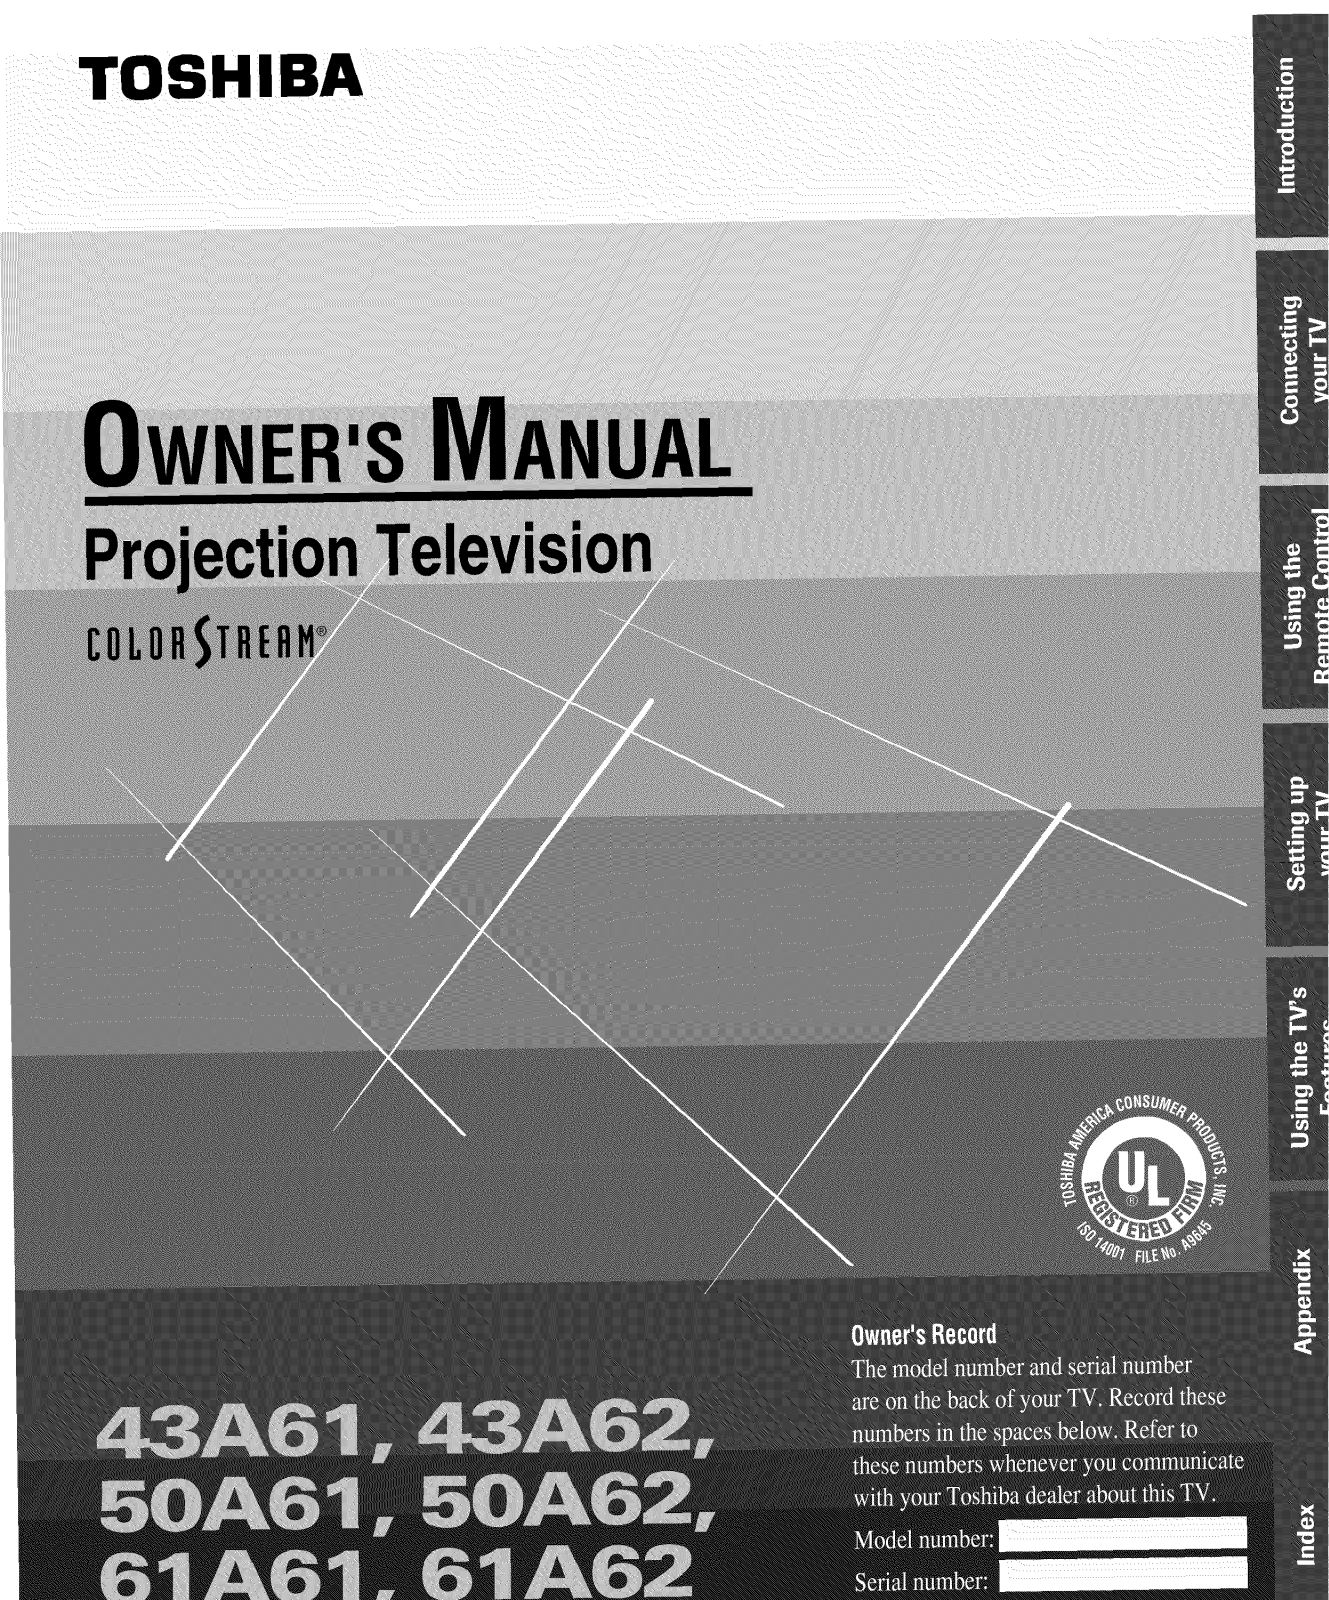 Toshiba 61A61, 50A62, 50A61, 43A62, 43A61 Owner’s Manual